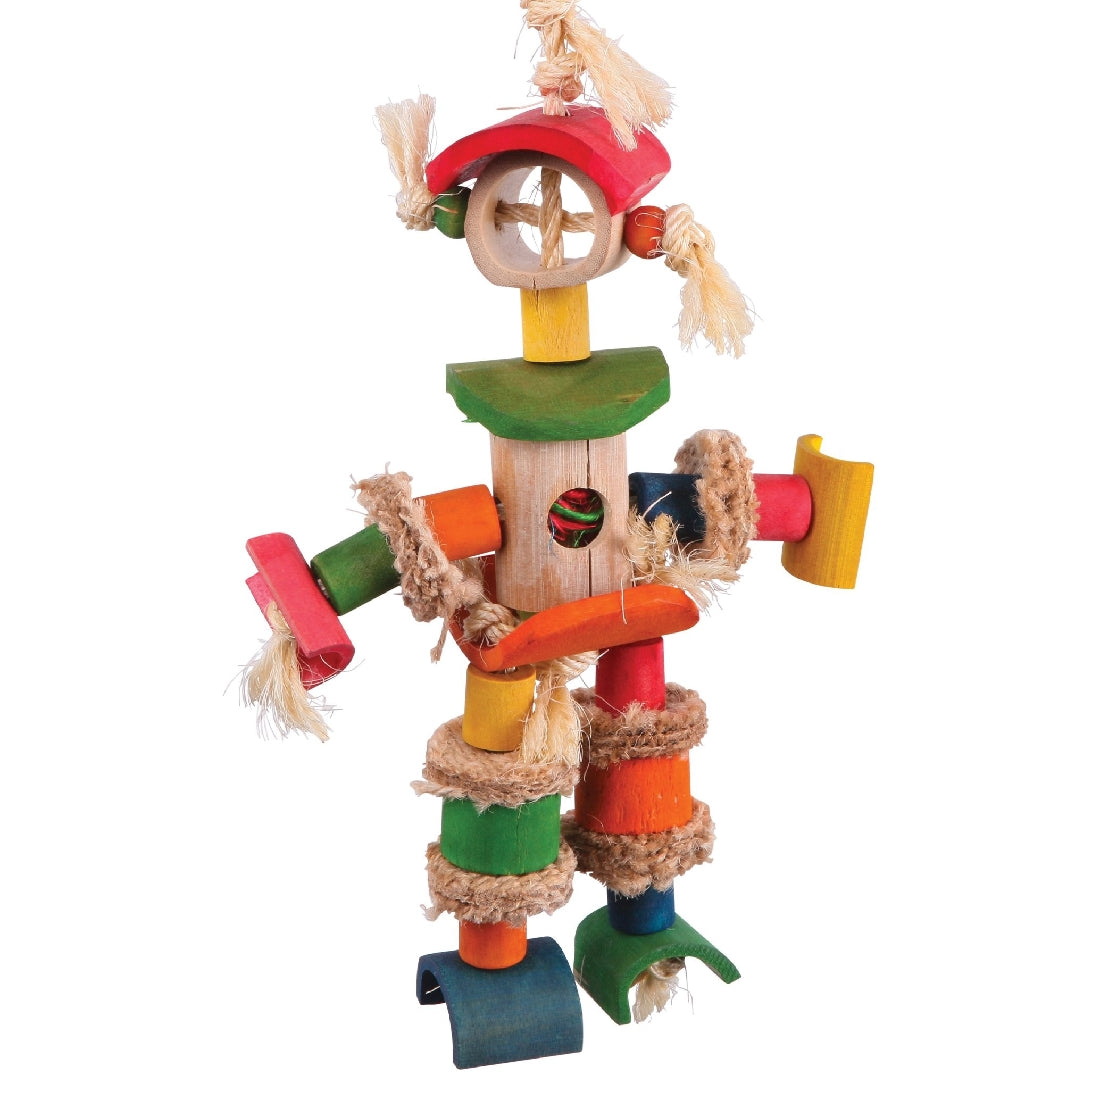 Colorful wooden bird toy with ropes, beads, and blocks isolated.